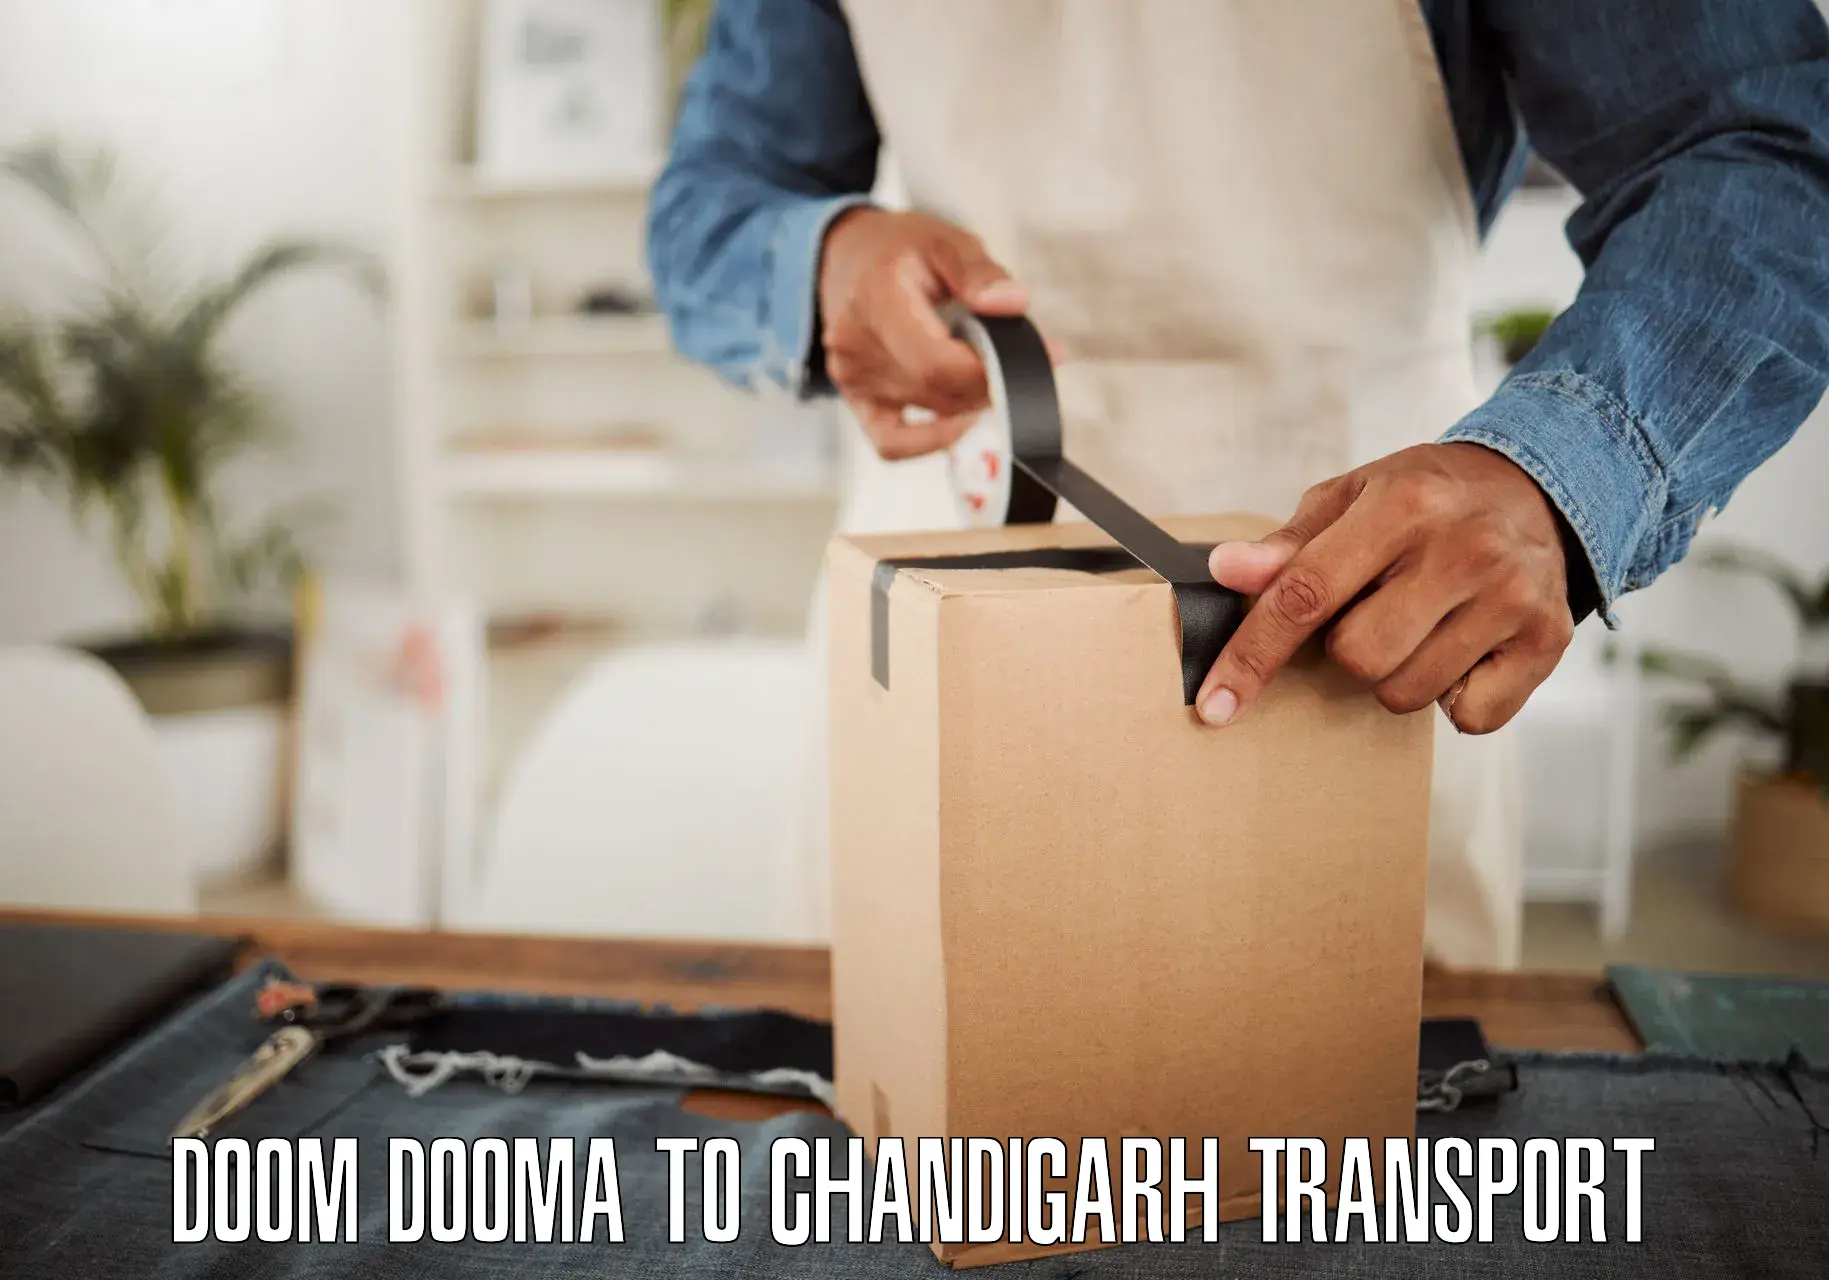 Vehicle courier services Doom Dooma to Chandigarh